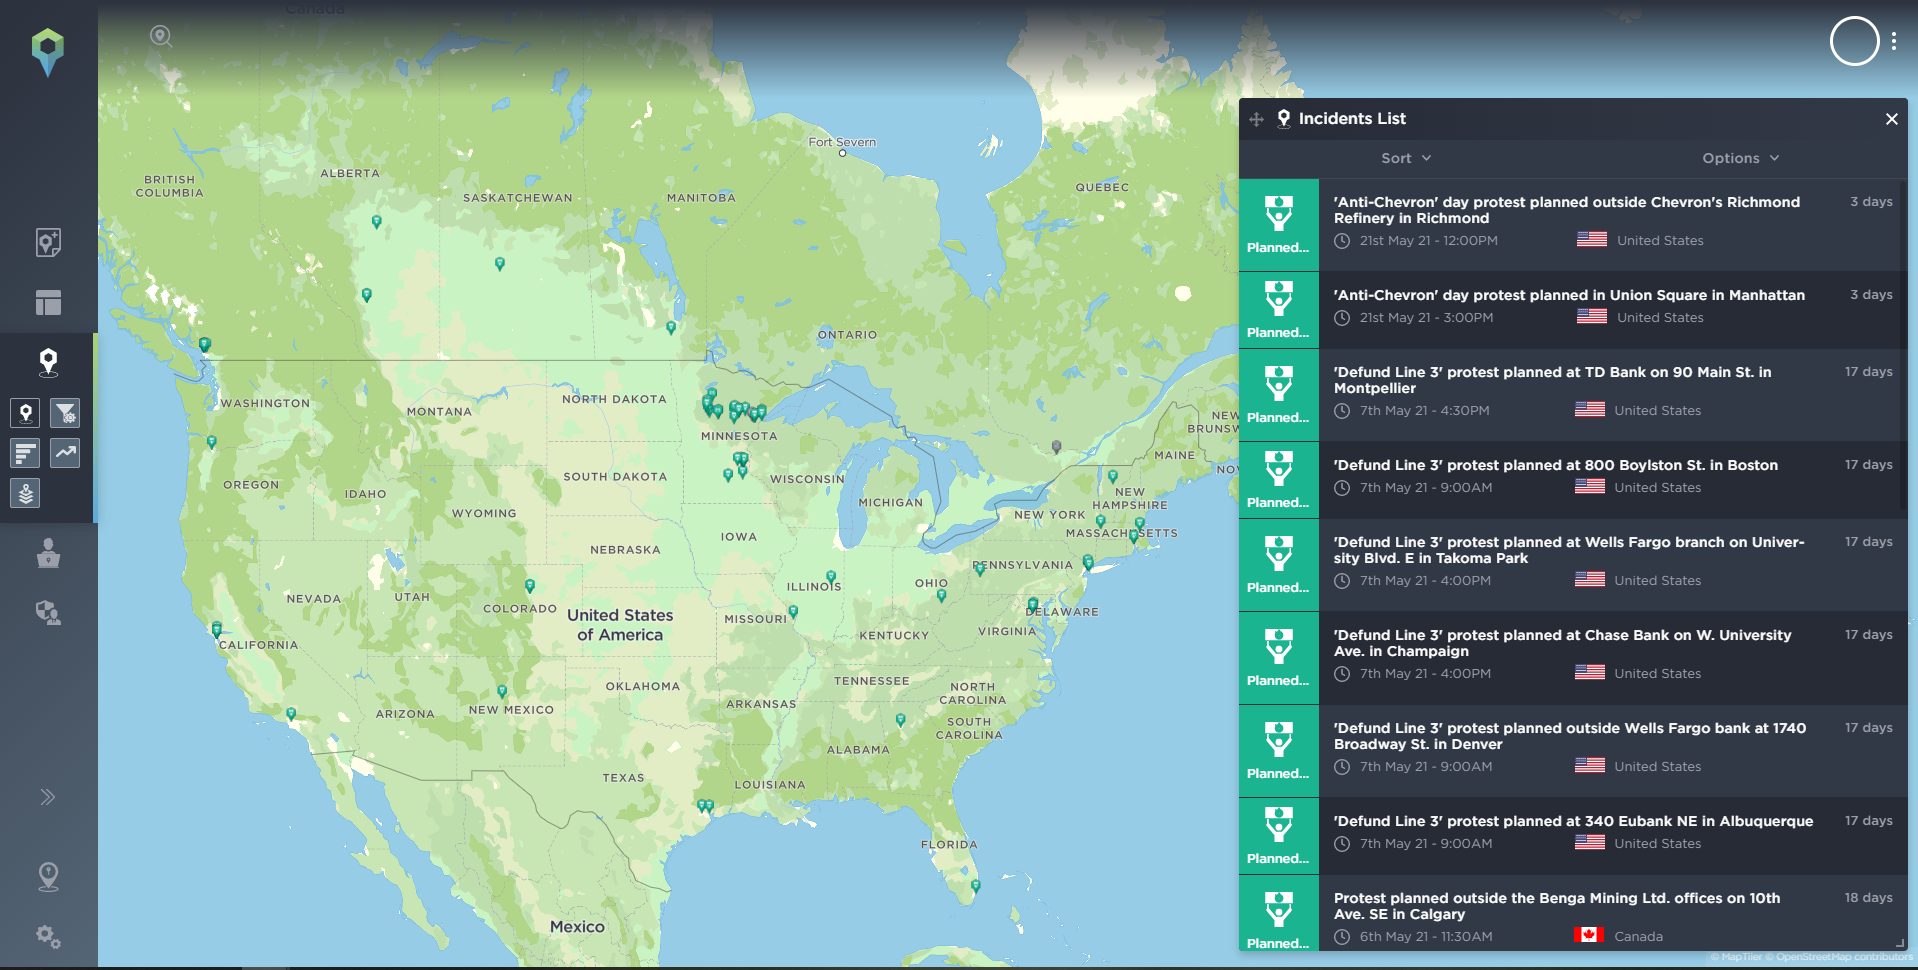 A map highlighting incidents associate with climate change activism and targeting the energy or mining industries in North America.